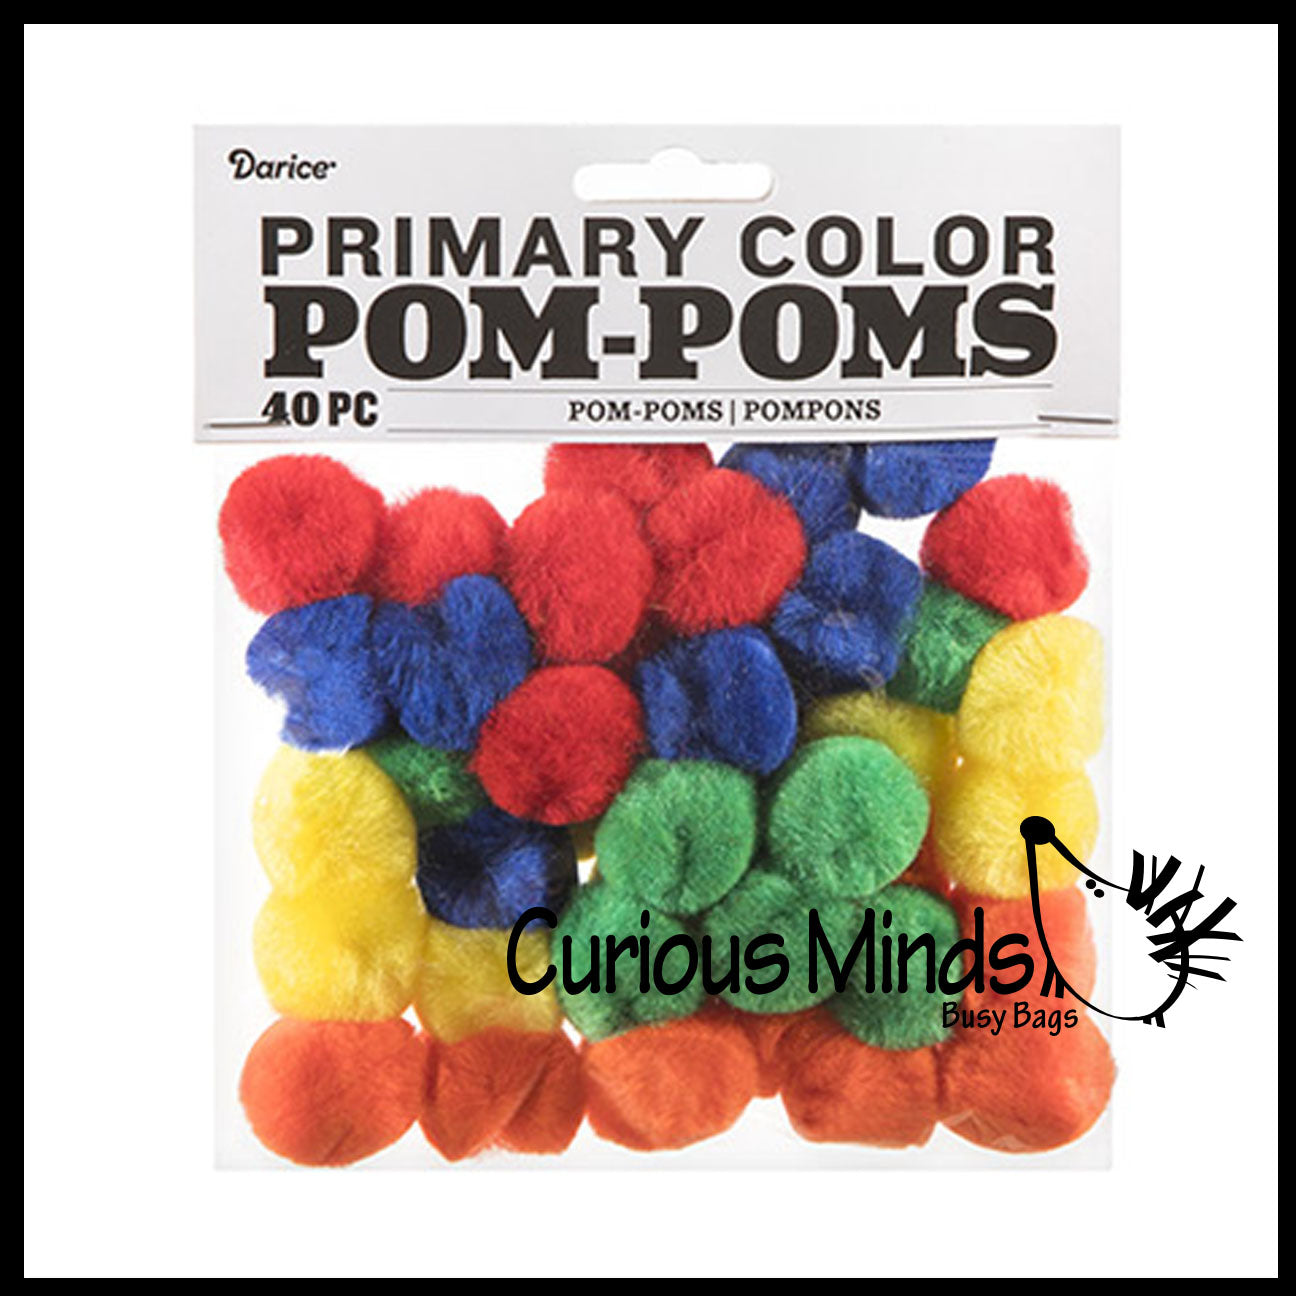 LAST CHANCE - LIMITED STOCK - CLEARANCE / SALE - 1 Primary Color Sort